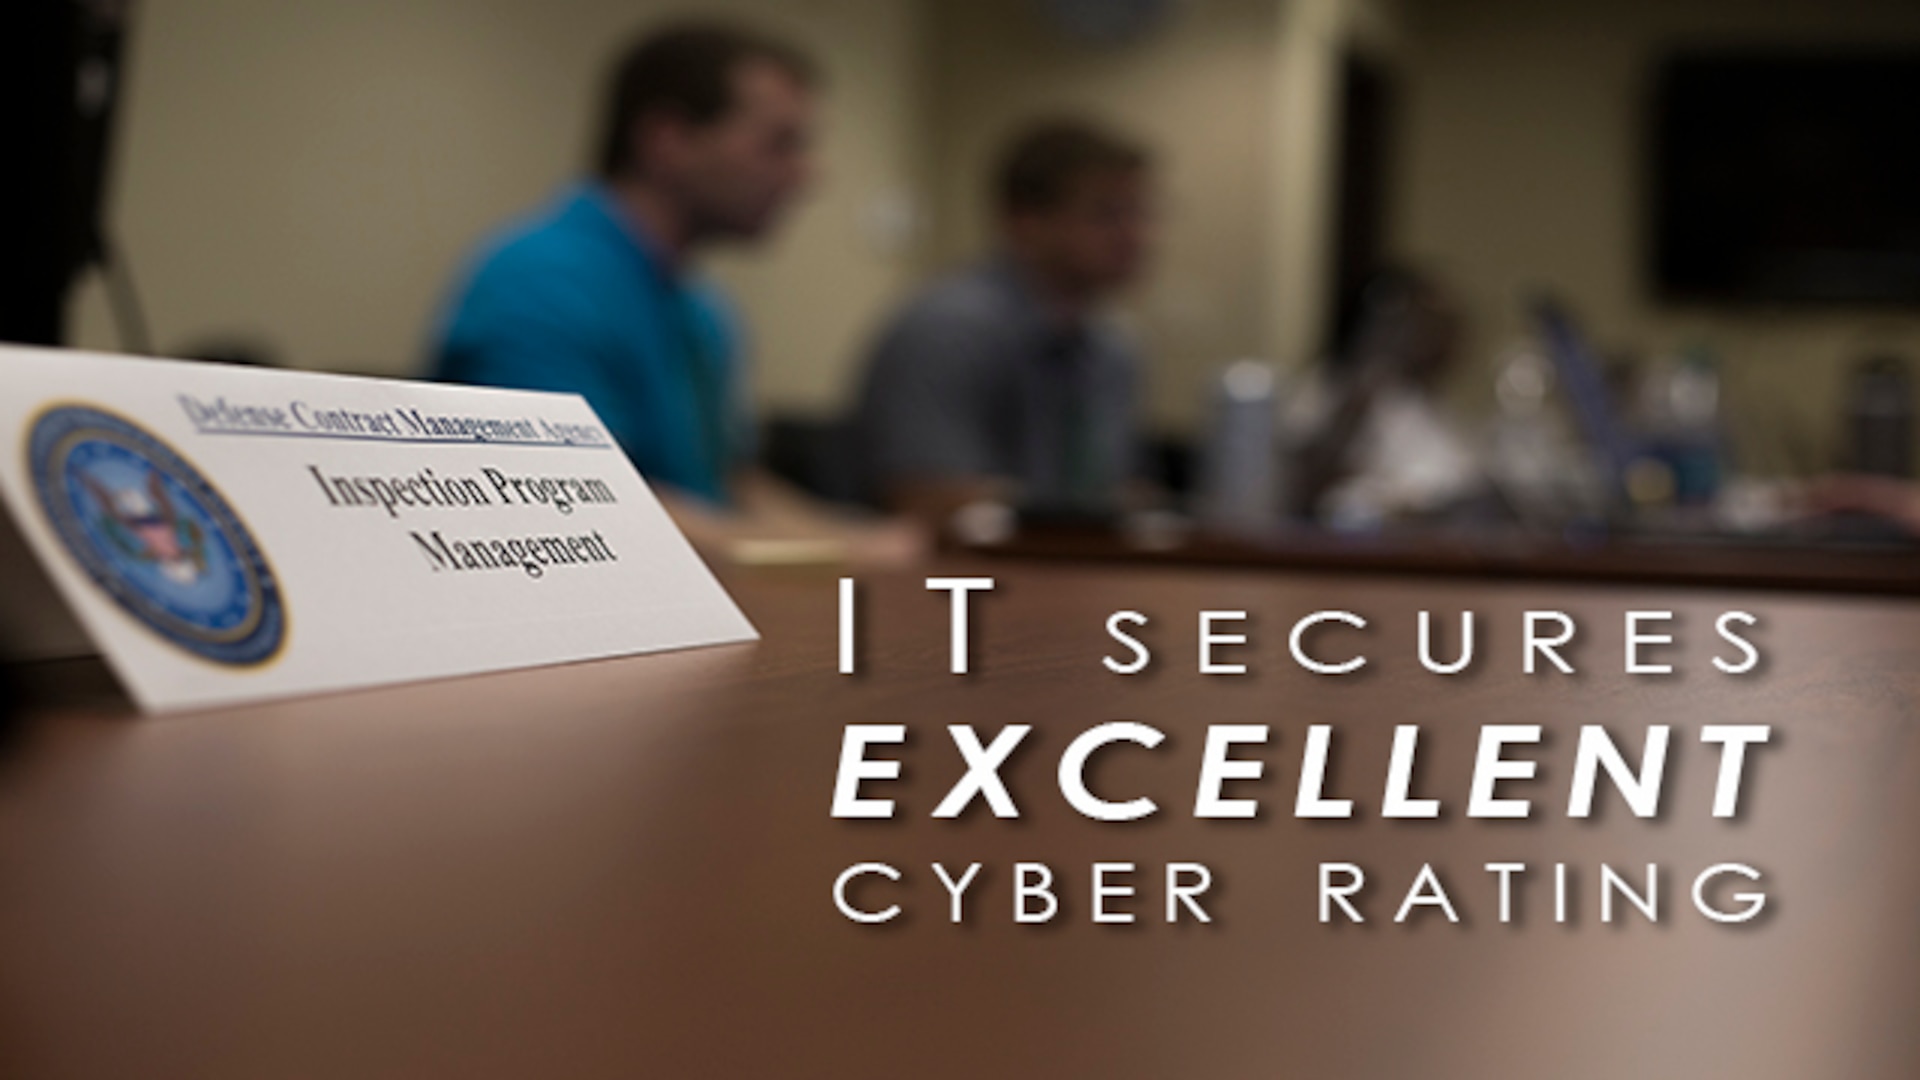 Defense Contract Management Agency's Information Technology department earns "excellent" rating during the Command Cyber Readiness Inspection, Sept. 29, 2017. (DCMA photo by Elizabeth Szoke)